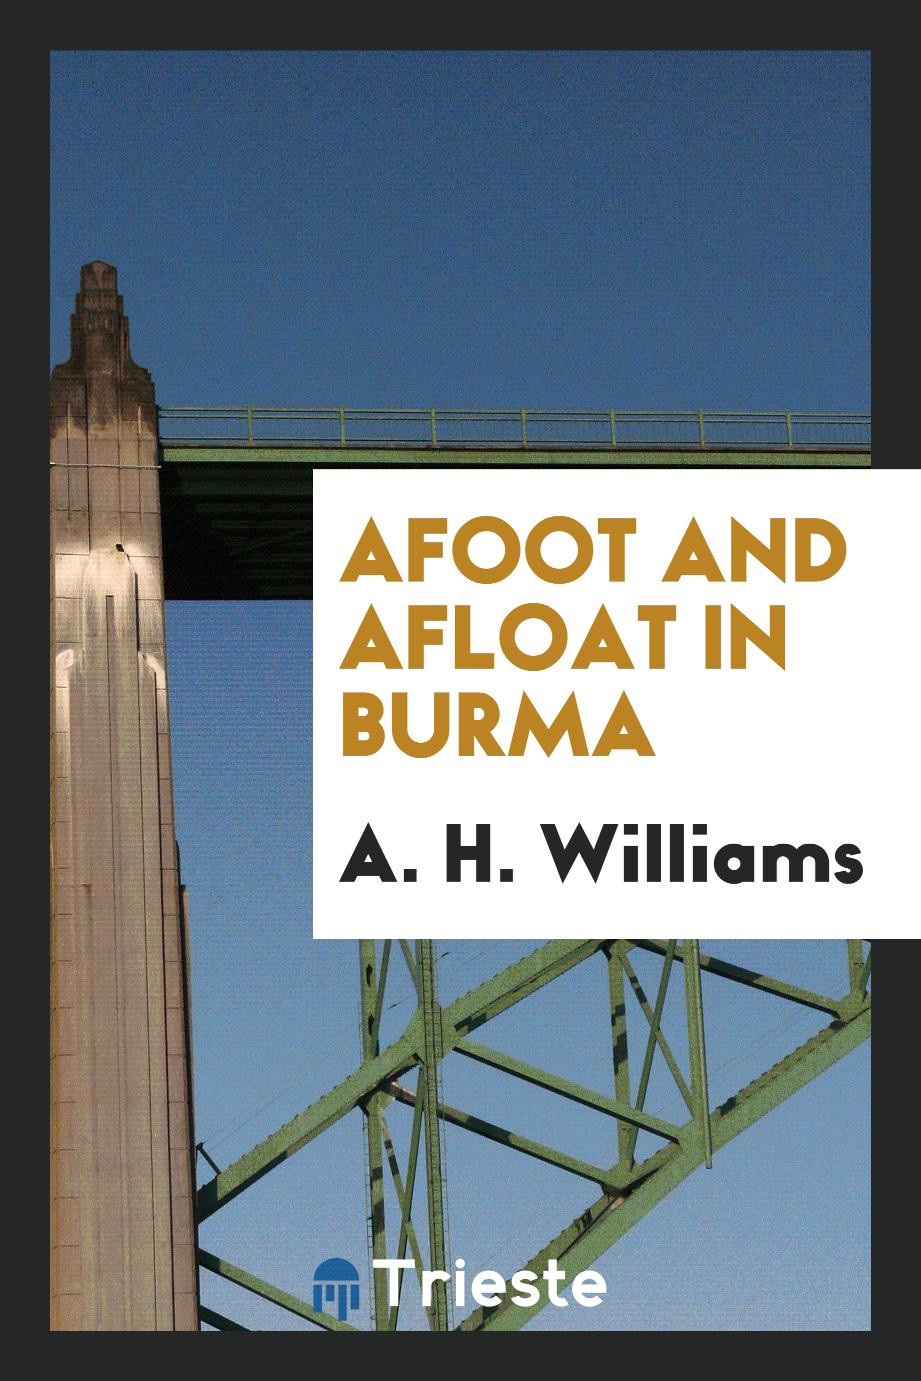 Afoot and afloat in Burma